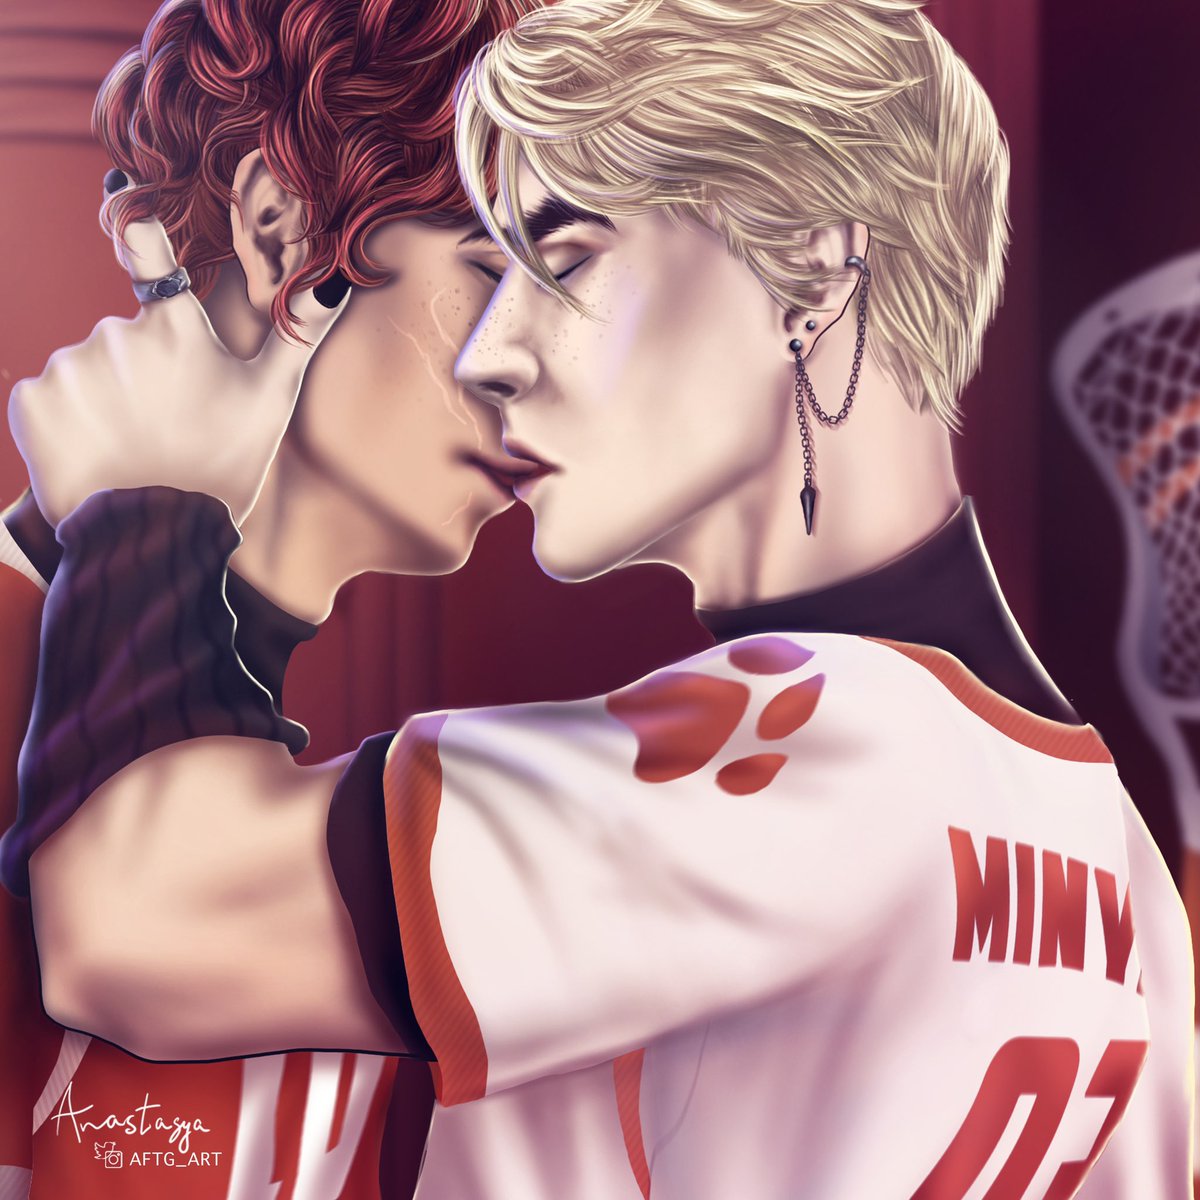 Do I have another version of this? Definitely yes 🧡

#aftg #aftgart #allforthegame #aftgfanart #neiljosten #andrewminyard #andreil #gofoxes #exy